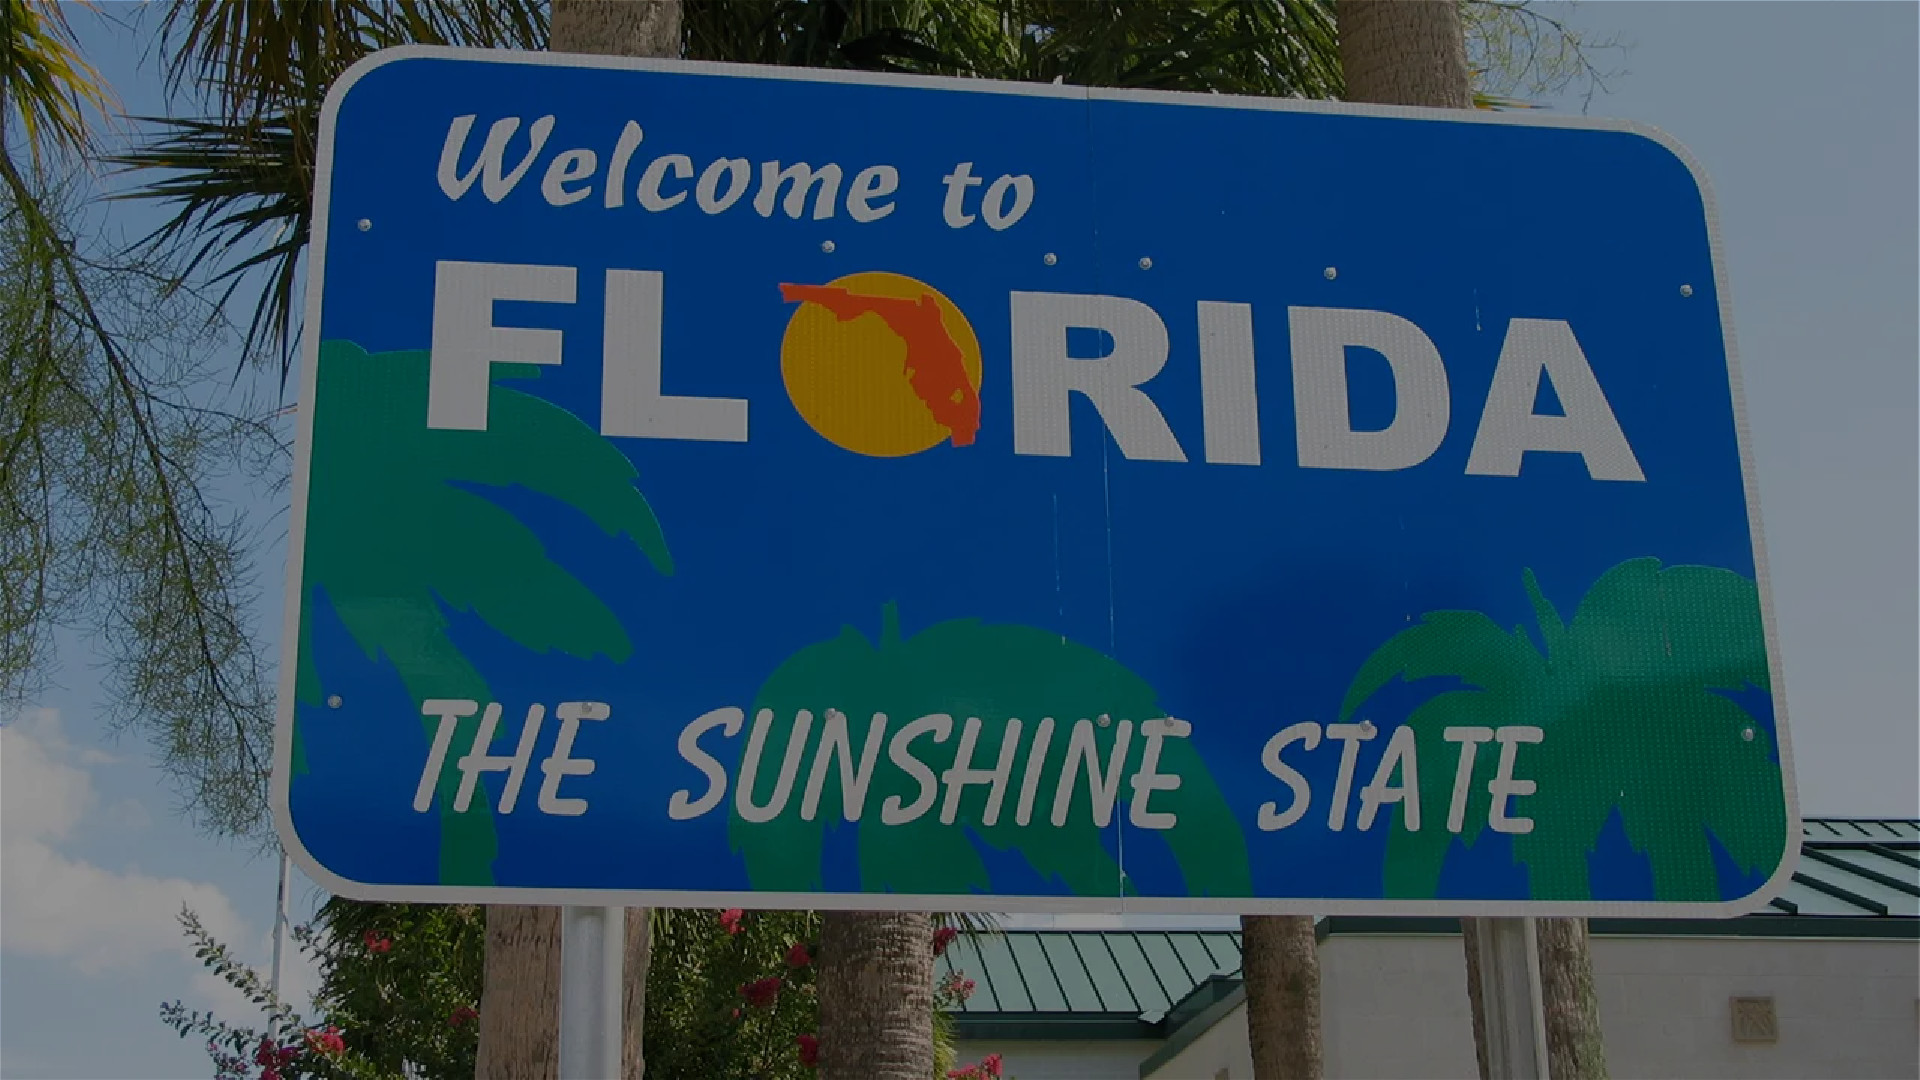 Breaking (the) News - What Is Going On In Florida?